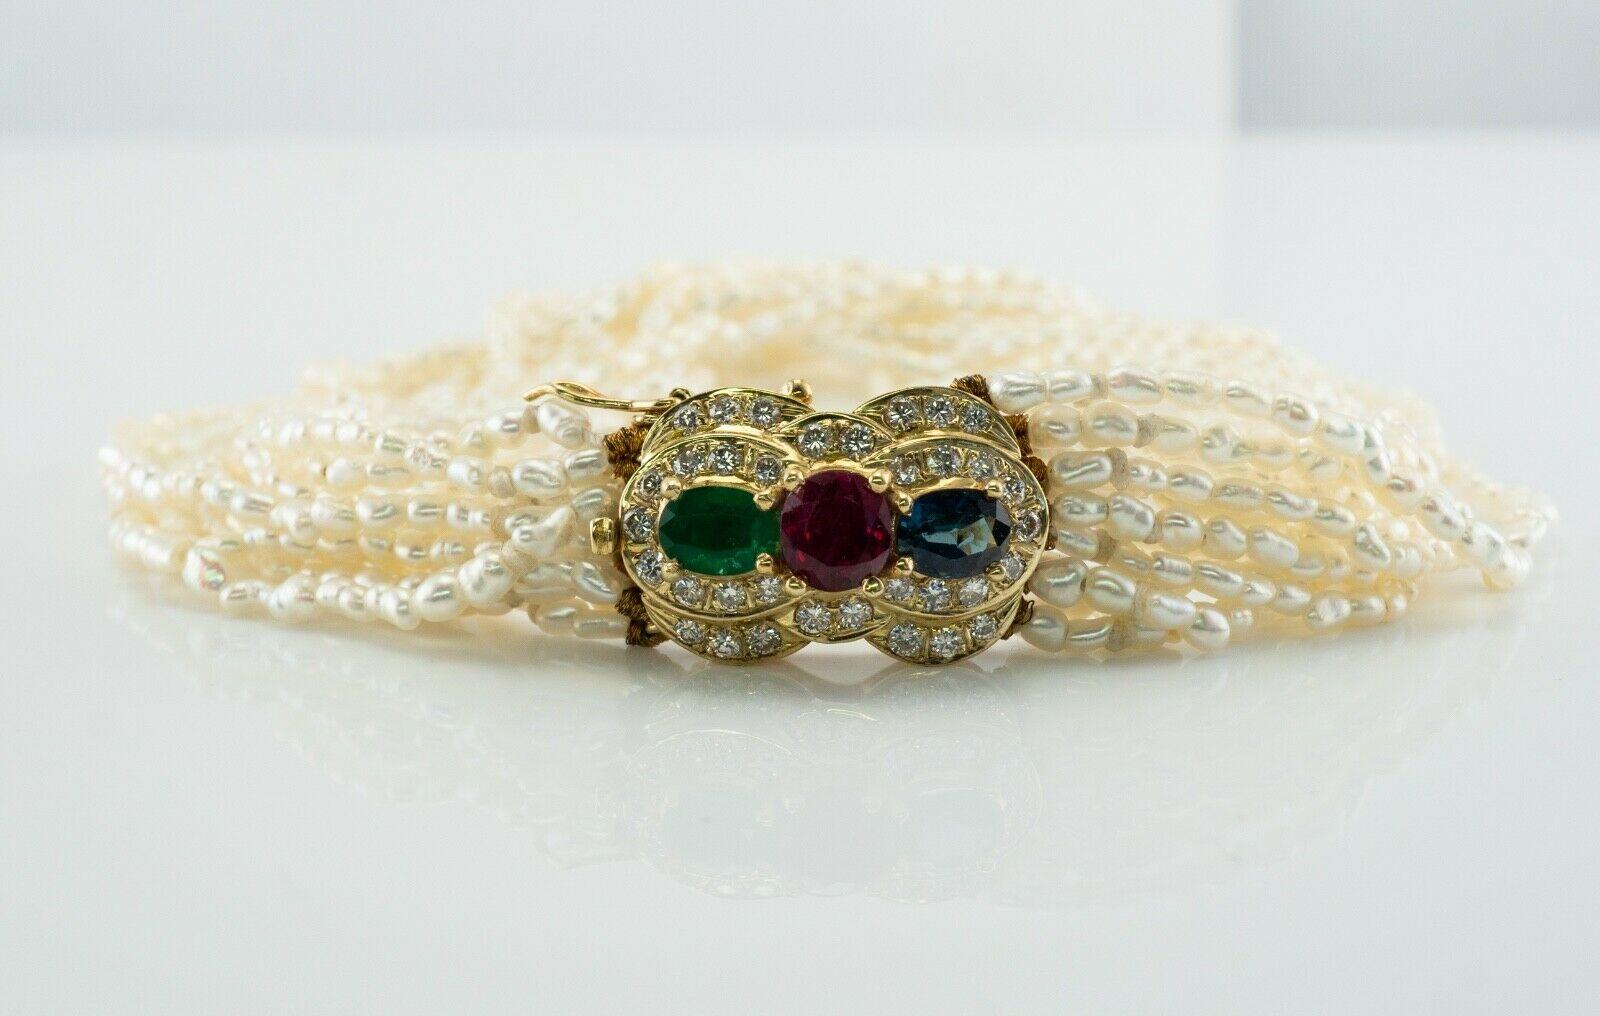 Seed Pearl Ruby Sapphire Bracelet Emerald Diamond 14K Gold

This pretty vintage bracelet is set with natural freshwater seed pearls with a solid 14K Yellow gold clasp. The clasp holds Natural Earth-mined Ruby in the center (5mm x 3.8mm = .40 carat),